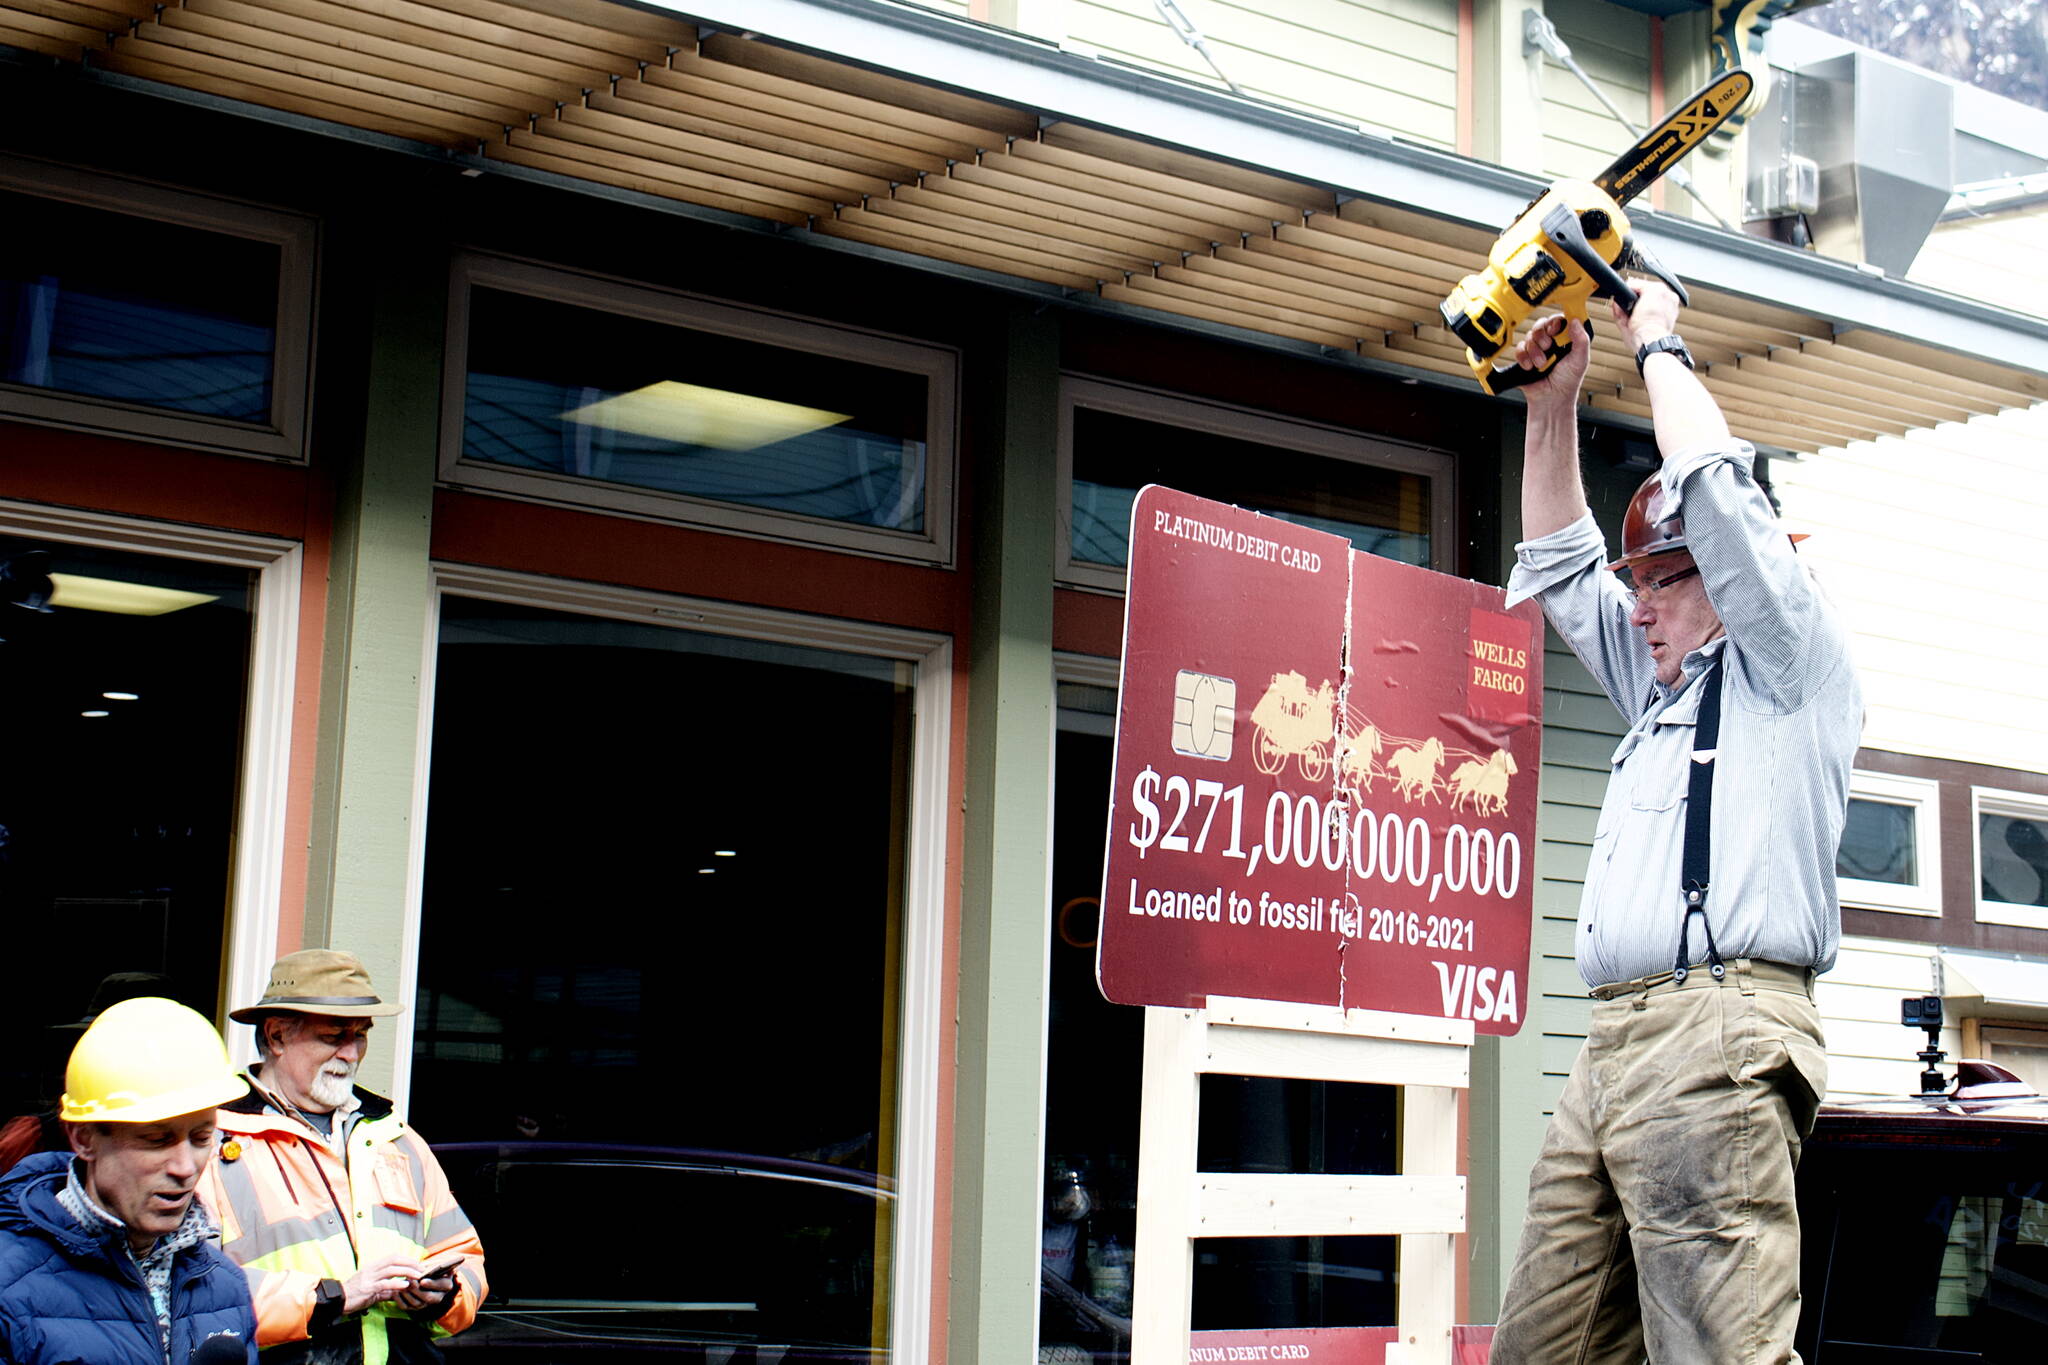 Mark Sabbatini / Juneau Empire
Bob Schroeder takes an electric chainsaw to a mock credit card during a protest outside the Wells Fargo in downtown Juneau at midday Tuesday. Schroeder cut up three mock credit cards representing three banks in Juneau protesters say are leading funders of fossil fuel development projects.